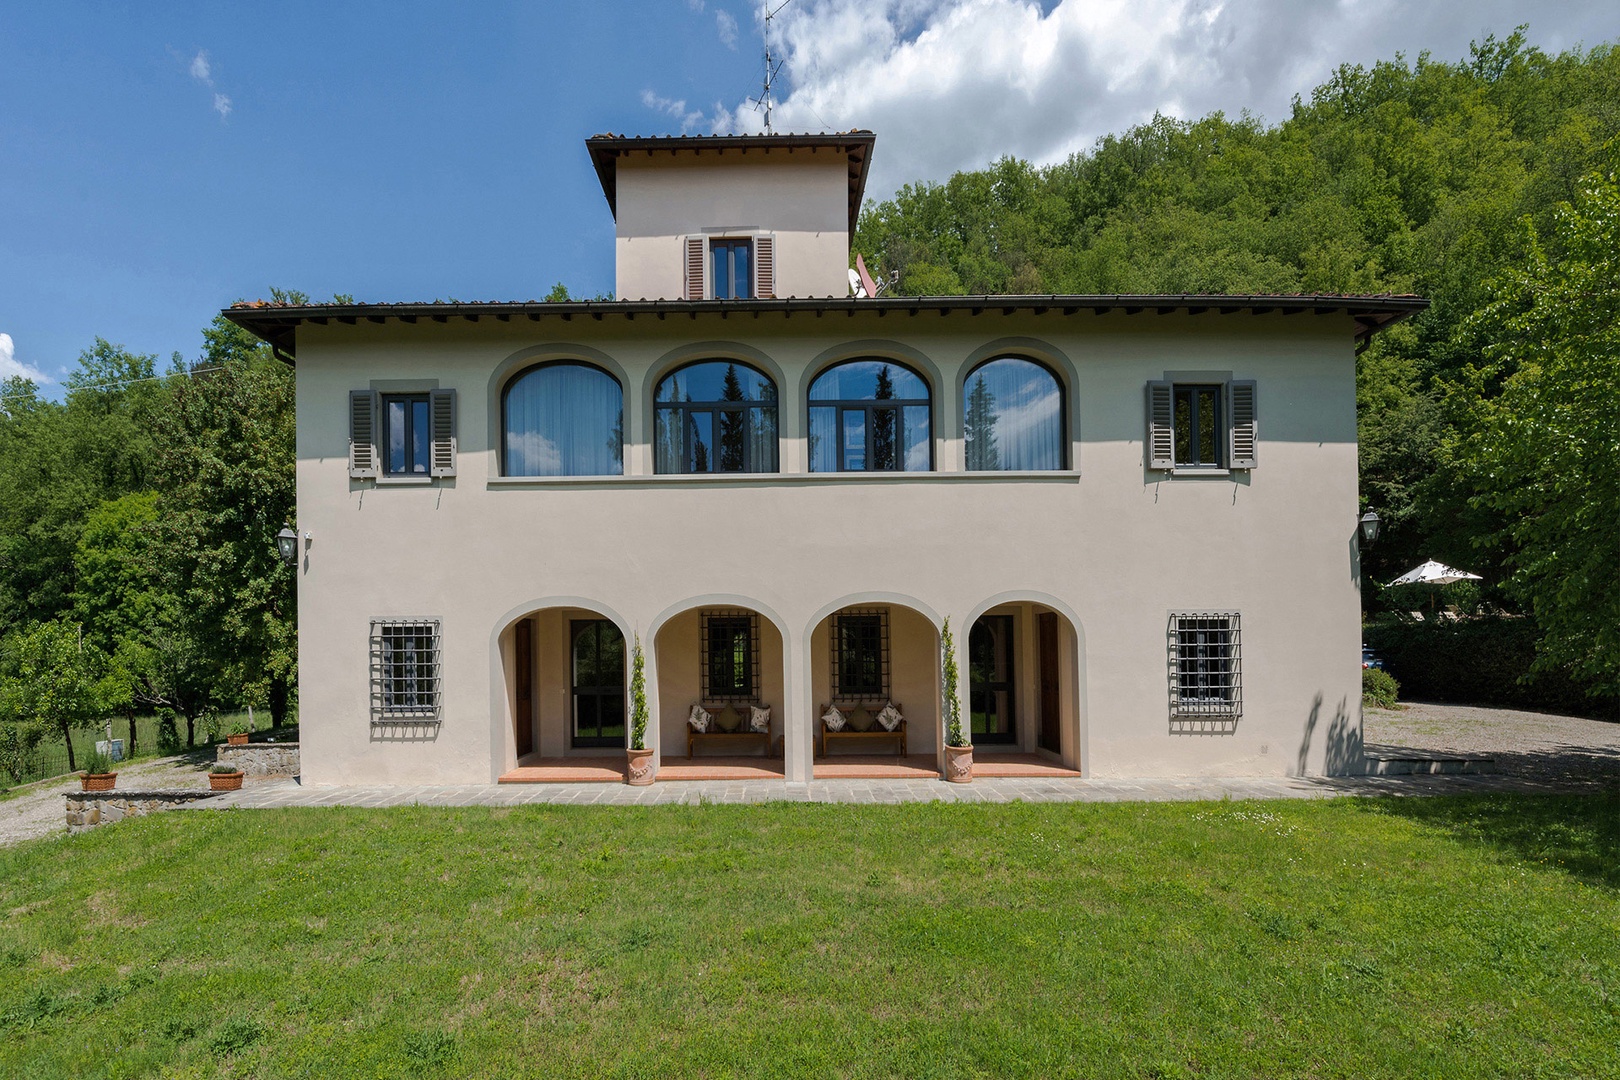 Villa Felice has been carefully restored to take advantage of the privacy and views.